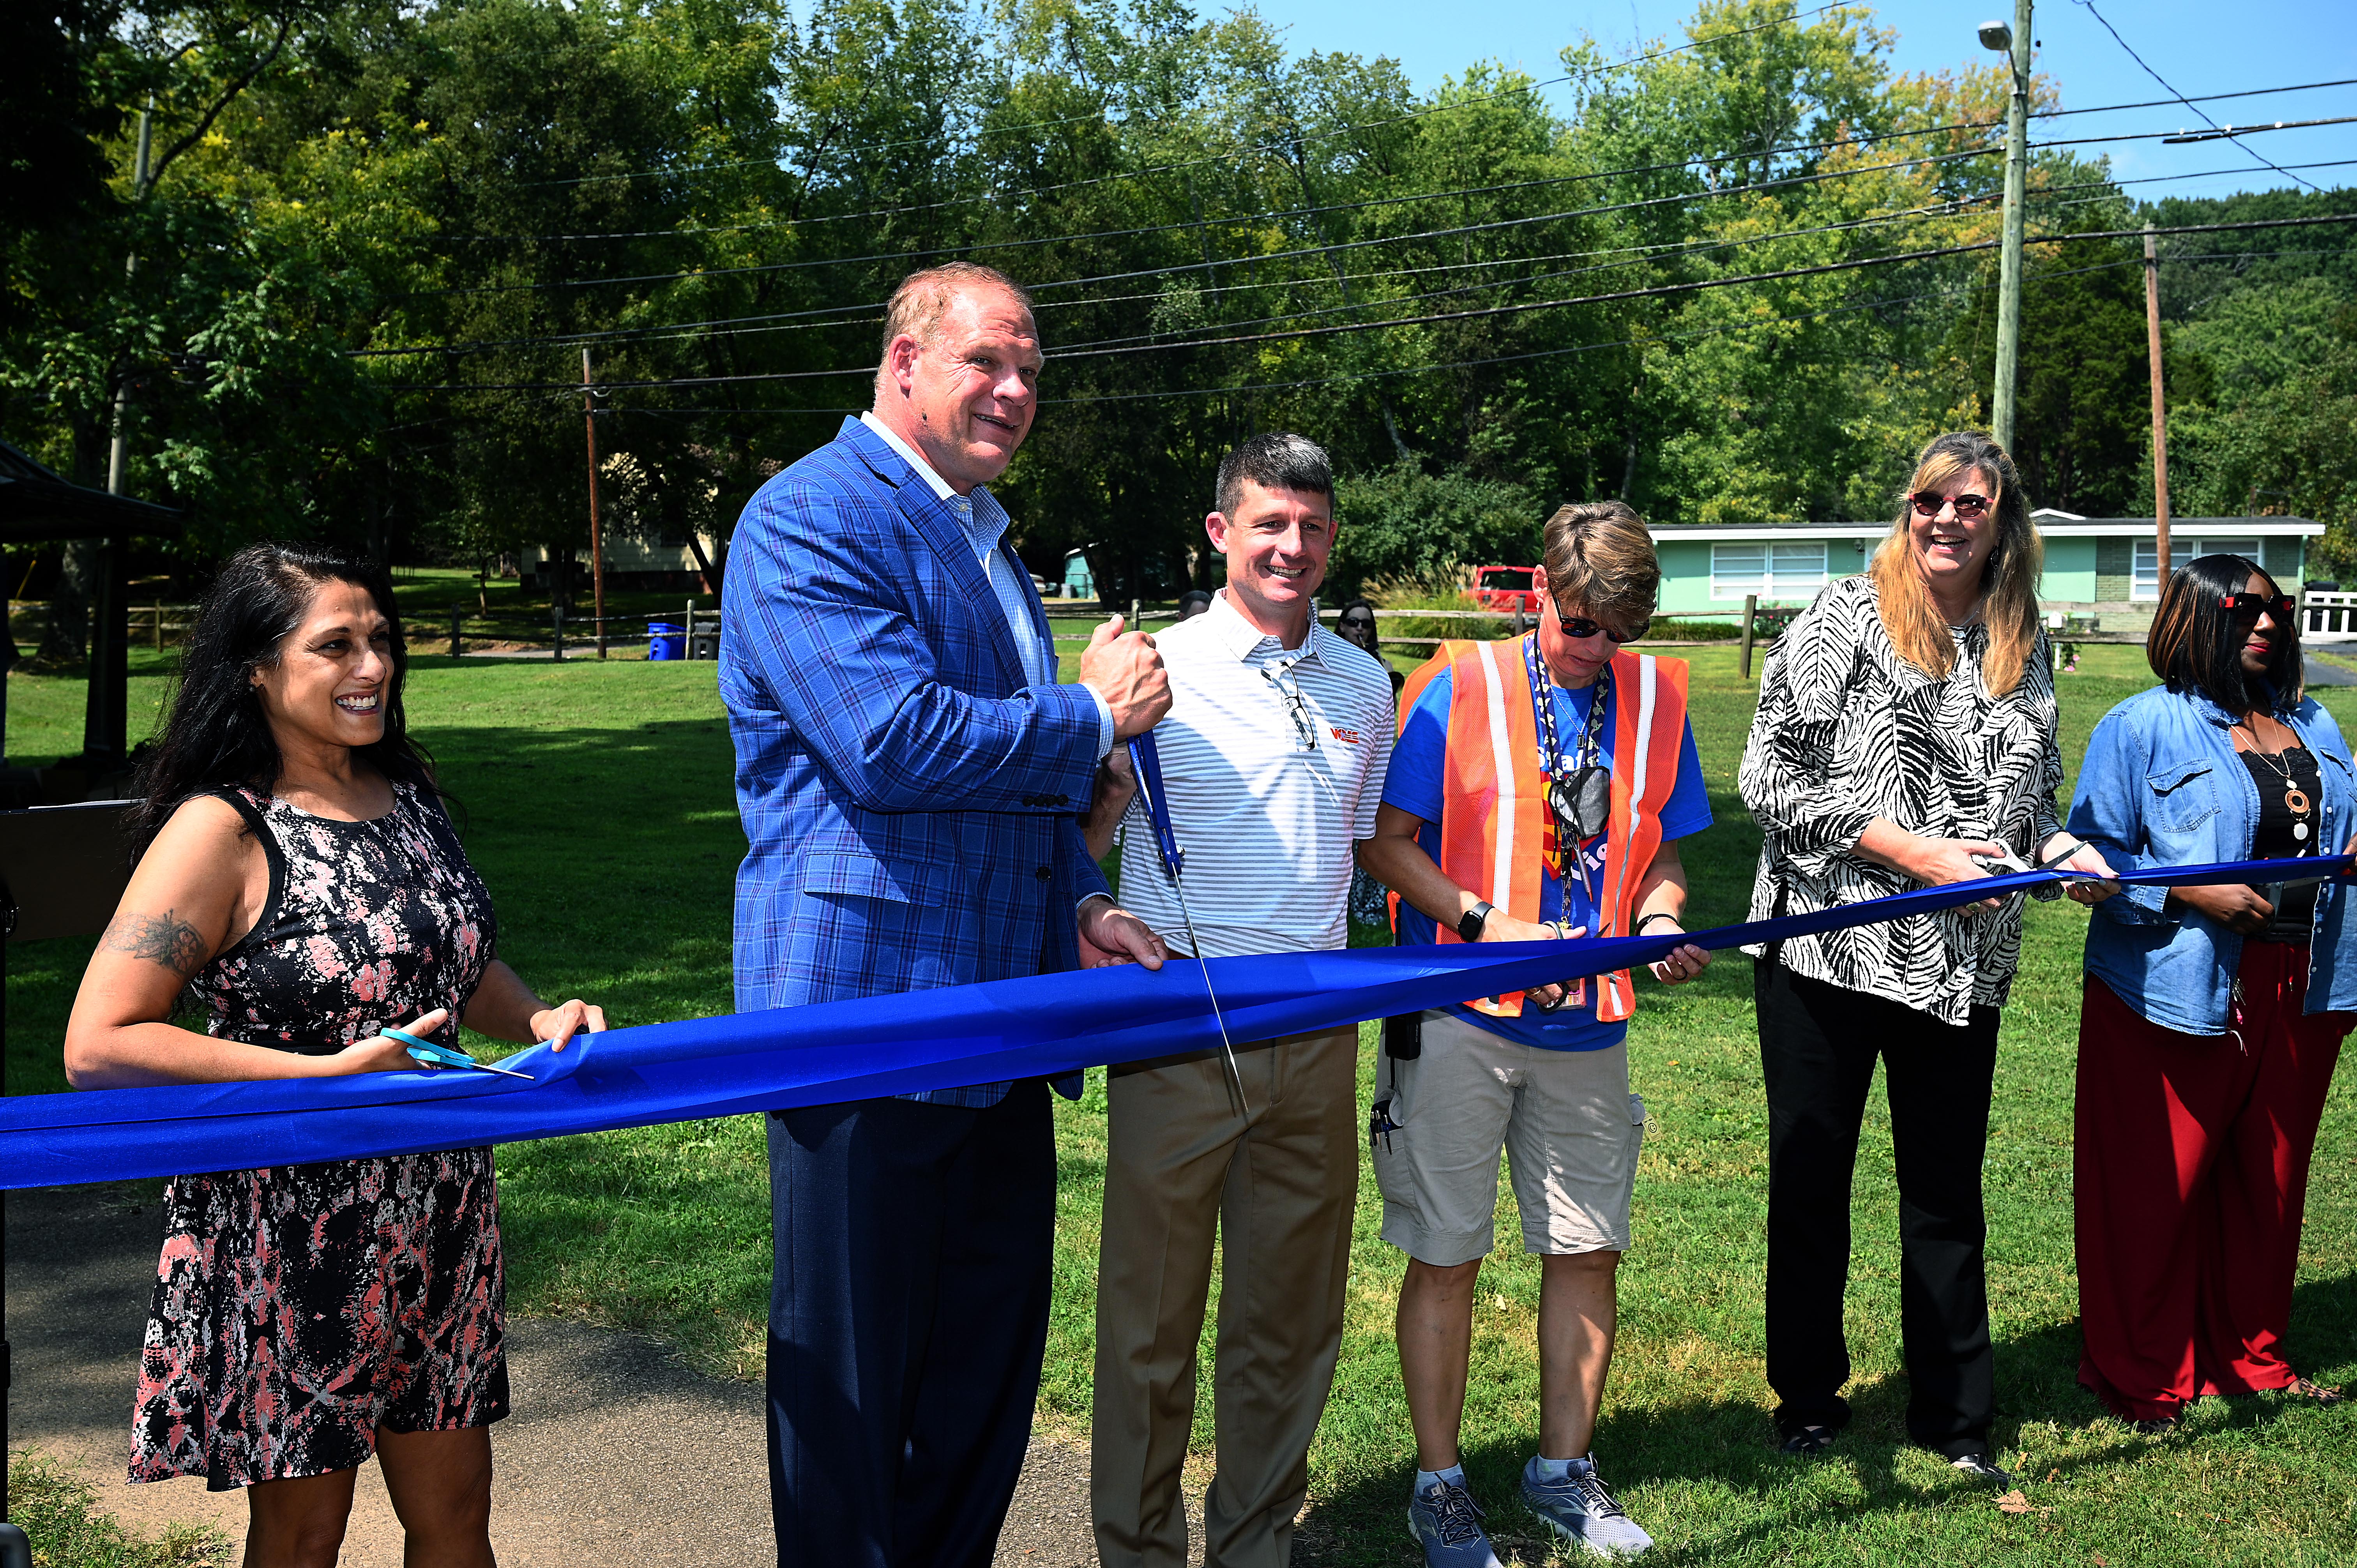 Mayor Glenn Jacobs and others cut a large blue ribbon